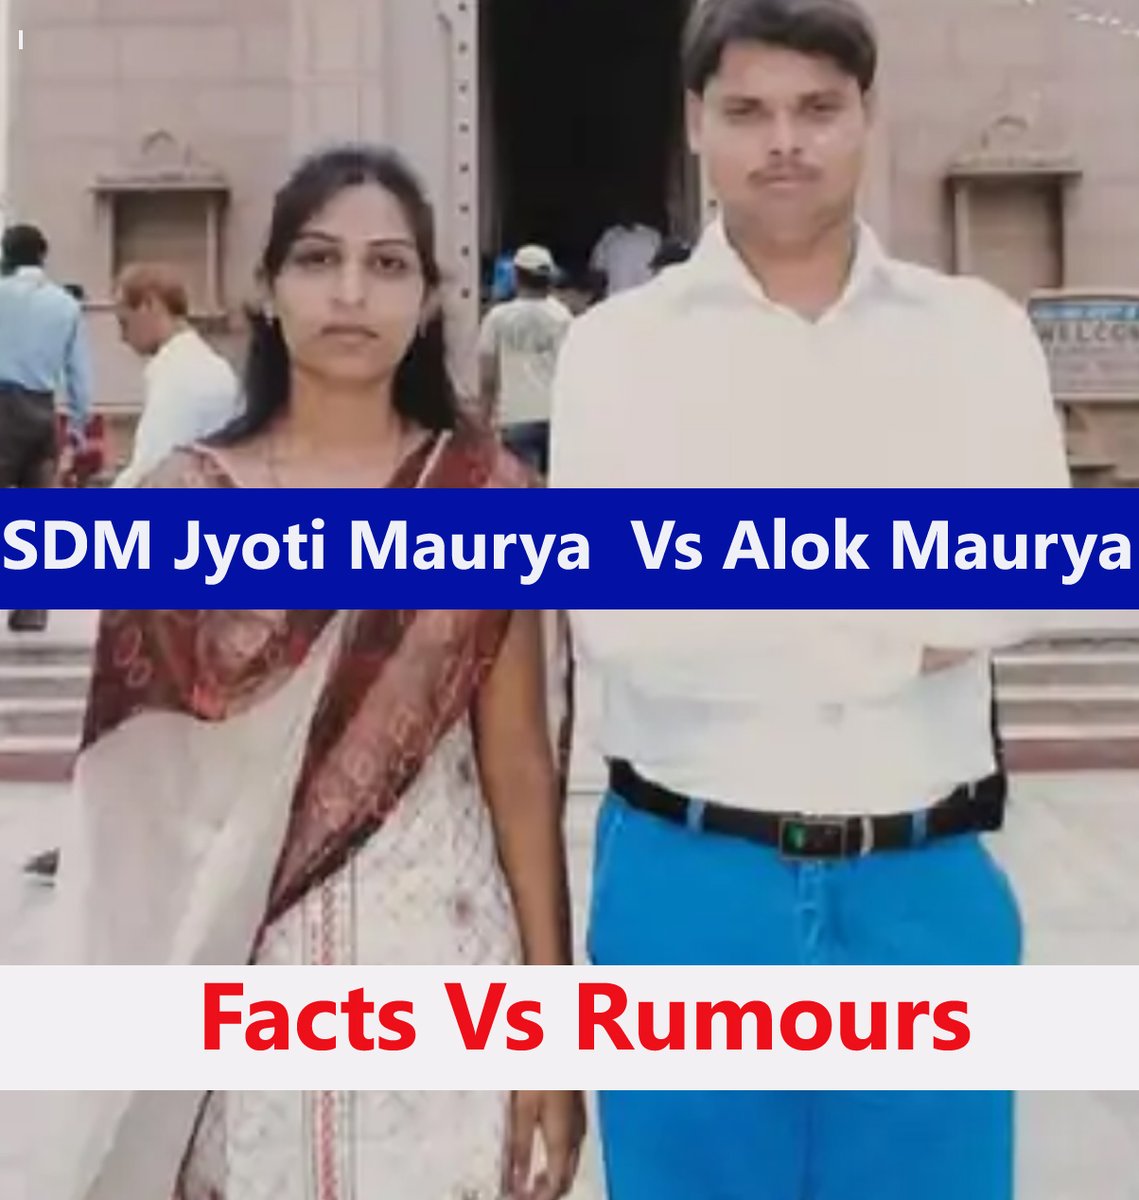 #JyotiMaurya Vs #AlokMaurya Updates:
There is always a man and a woman involved in any act of adultery and hence one cannot blame any particular gender for the same. #SupremeCourt decriminalized adultery for both the genders but in practical it get decriminalized only for a woman…